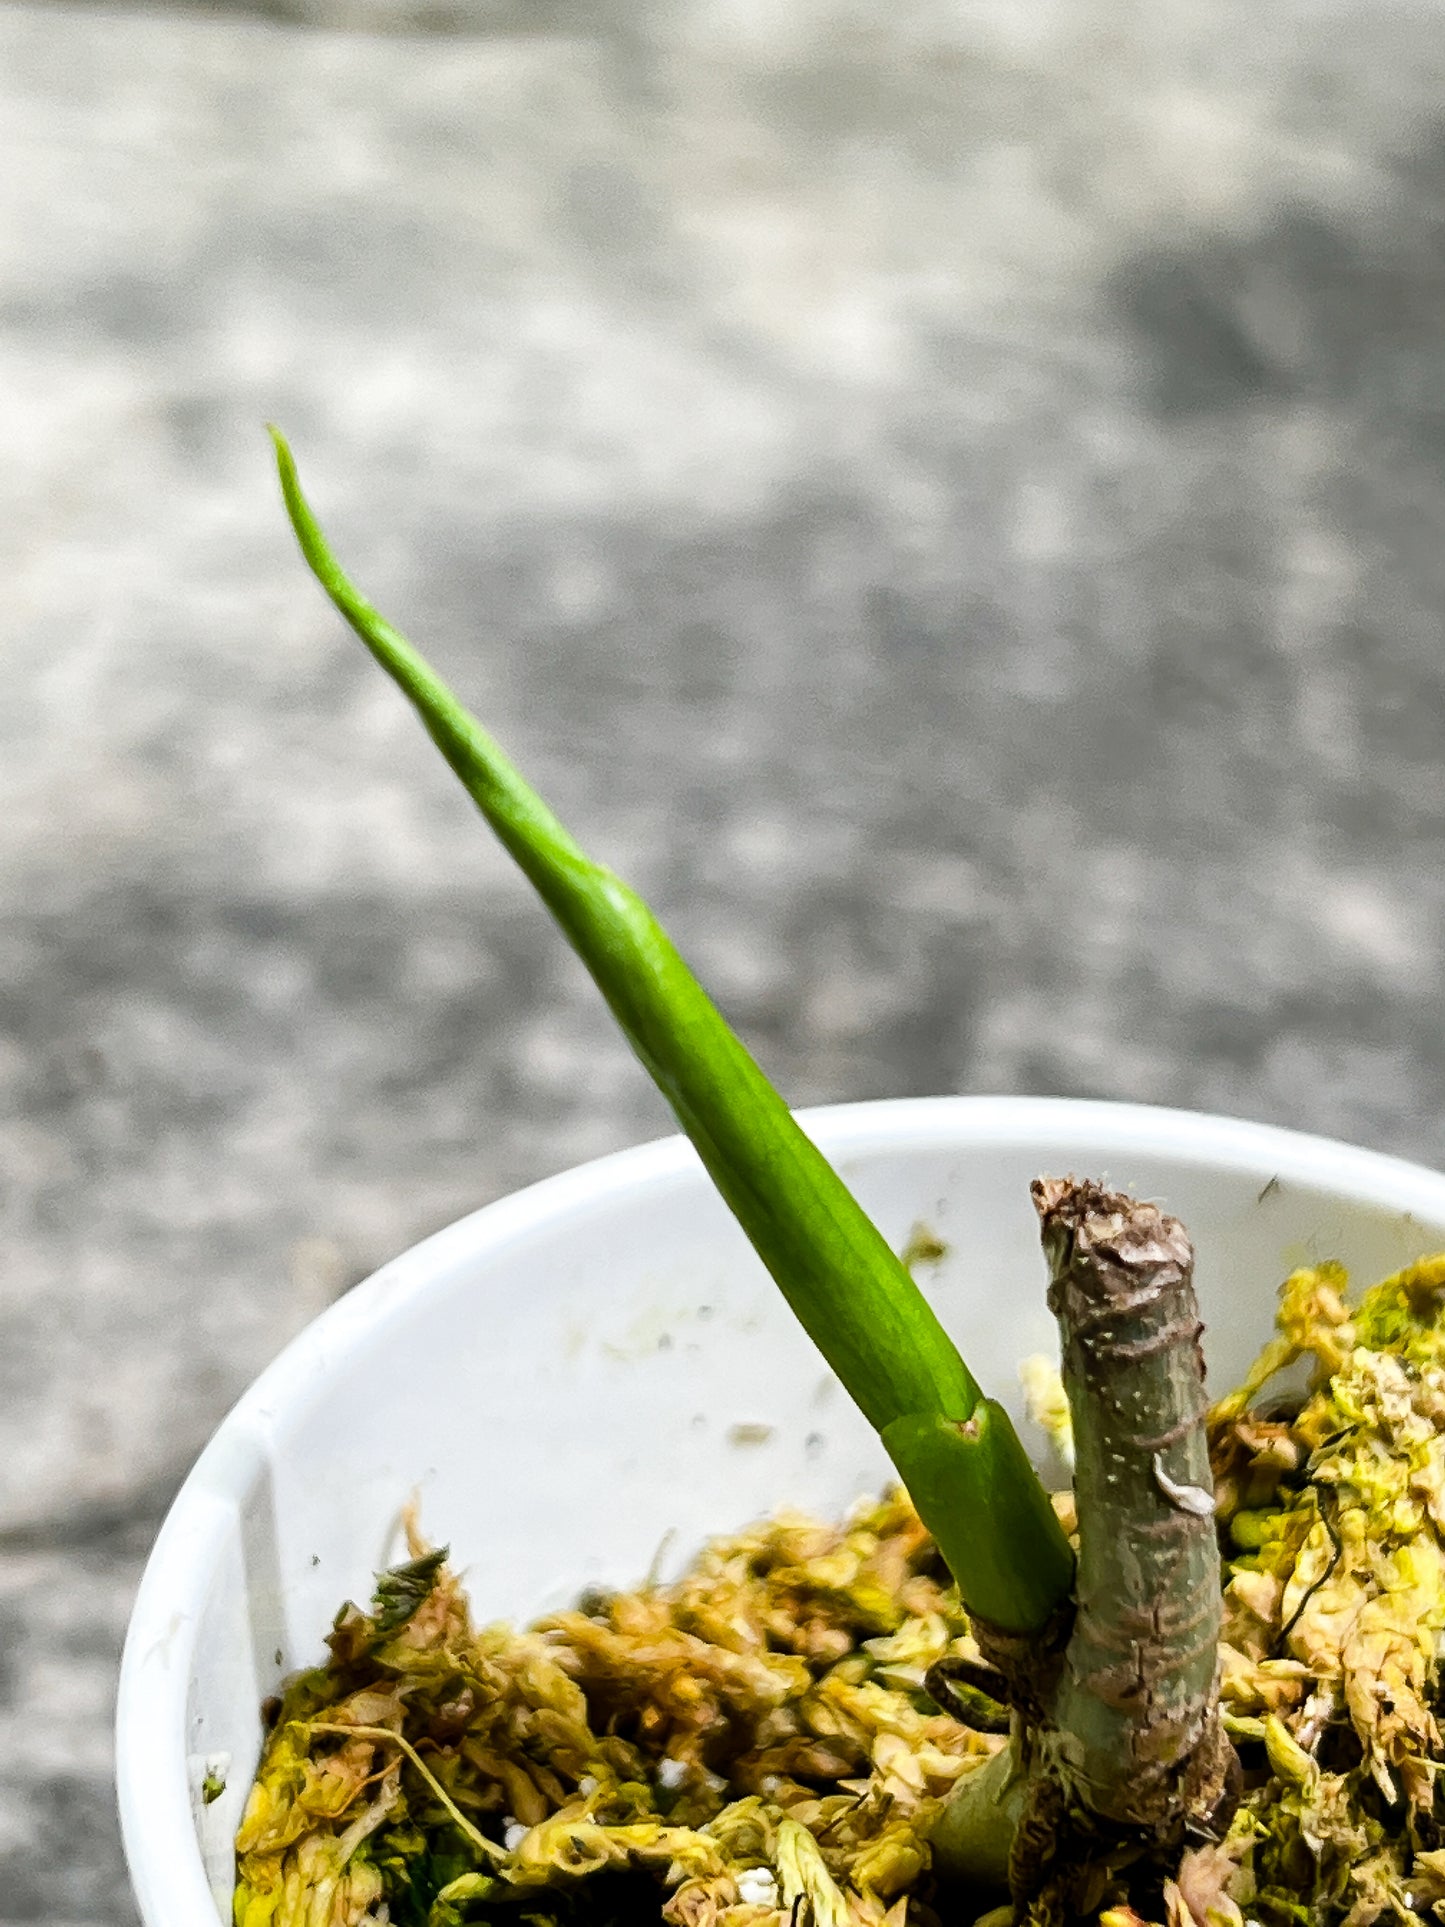 Grower Choice: Philodendron verrucosum Tambillo Rooted sprout about to unfurl